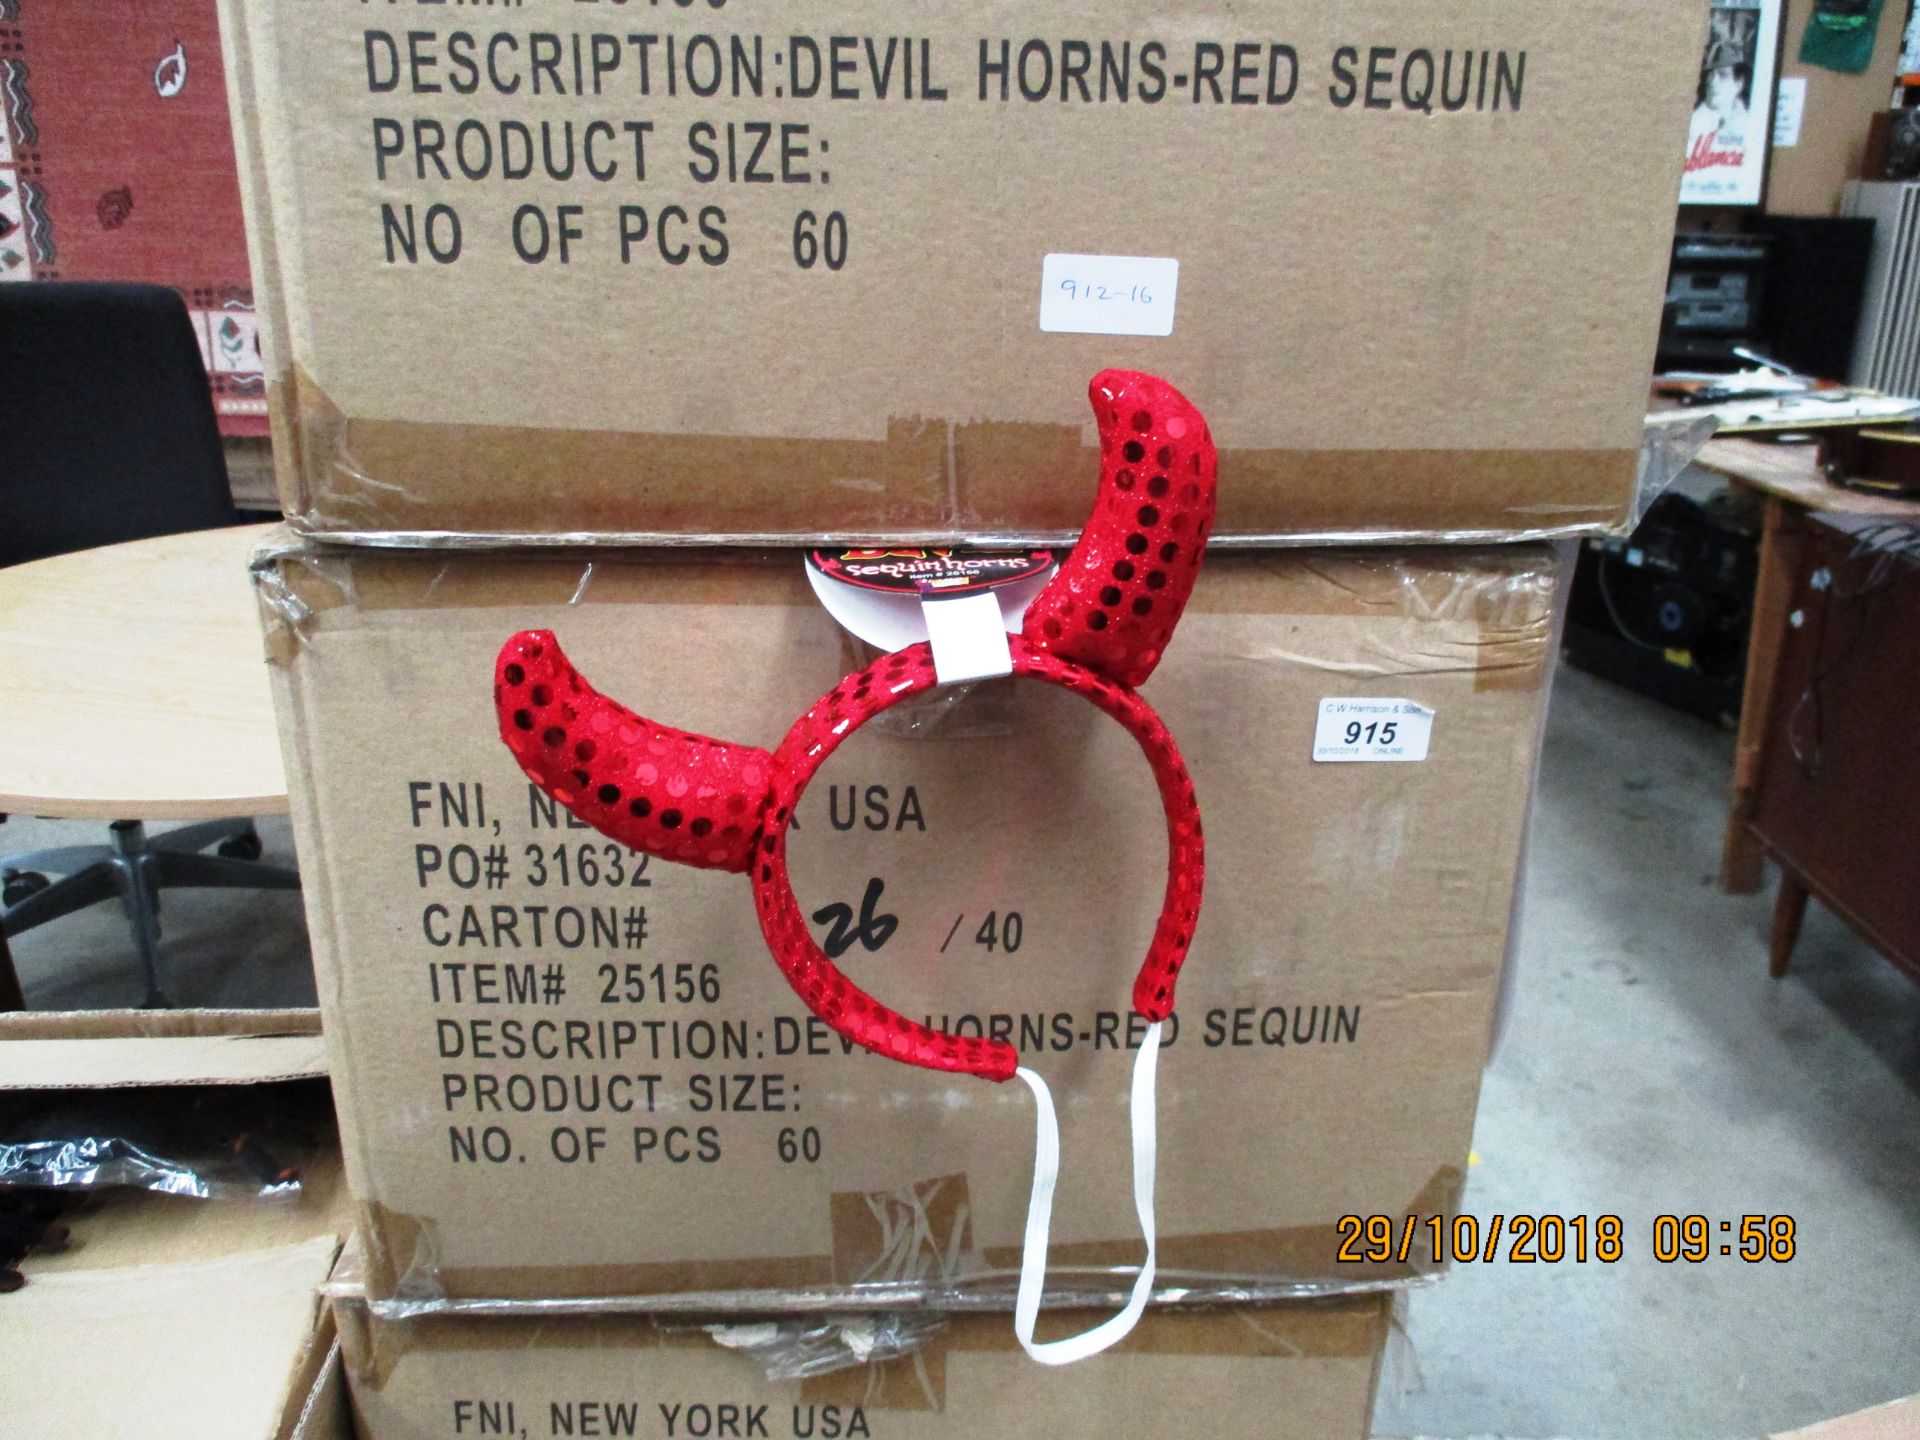 60 x Hot Glam devil sequin horns (1 outer box)